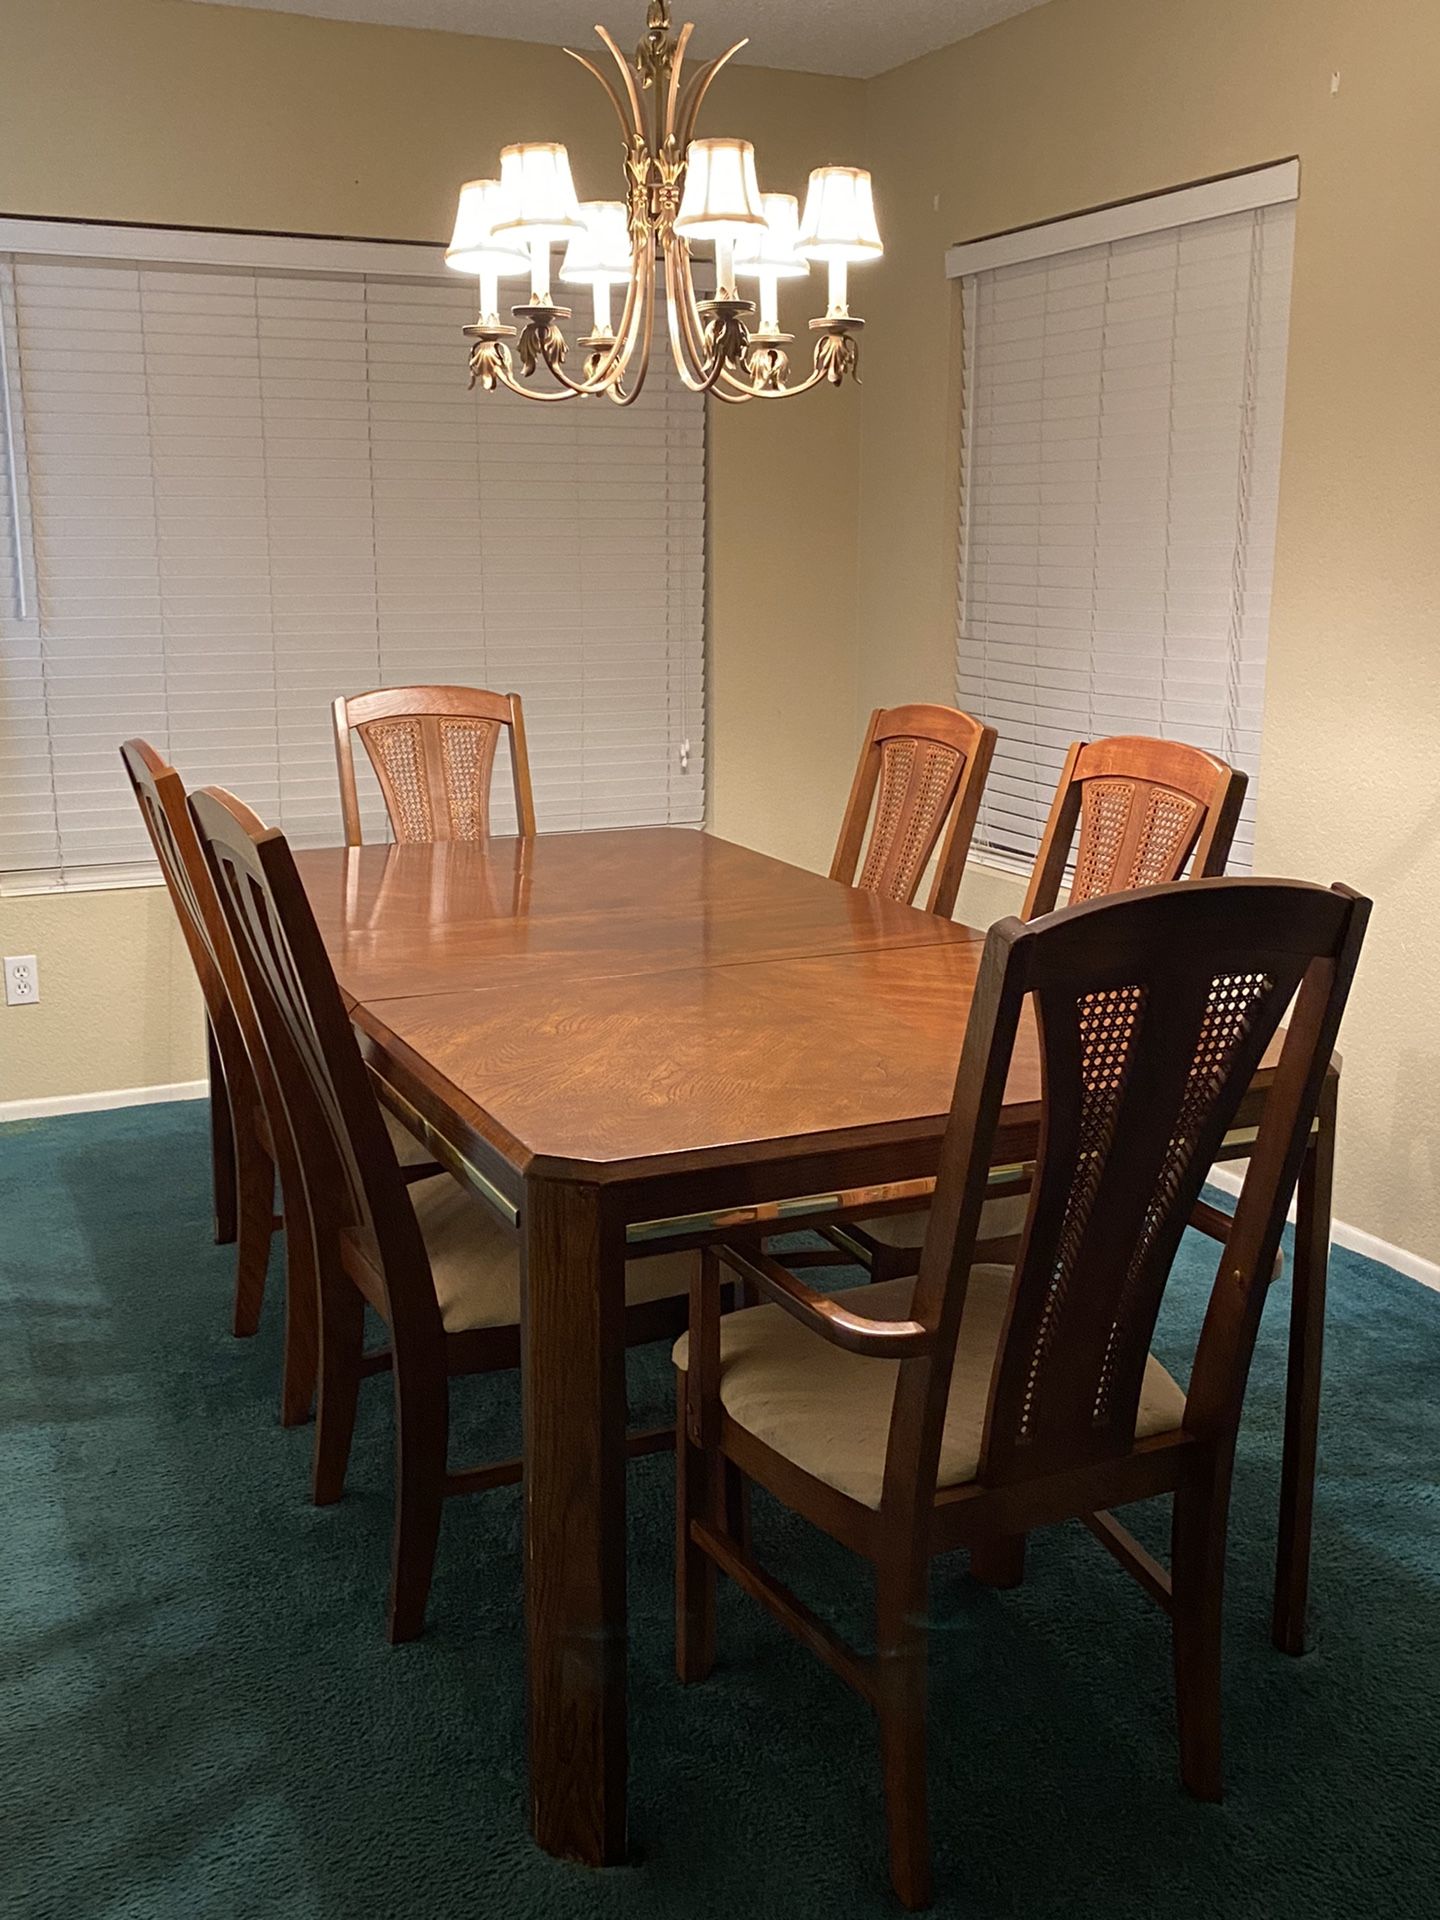 Modern  1980’s  Dining Table & 6 Chairs  $250